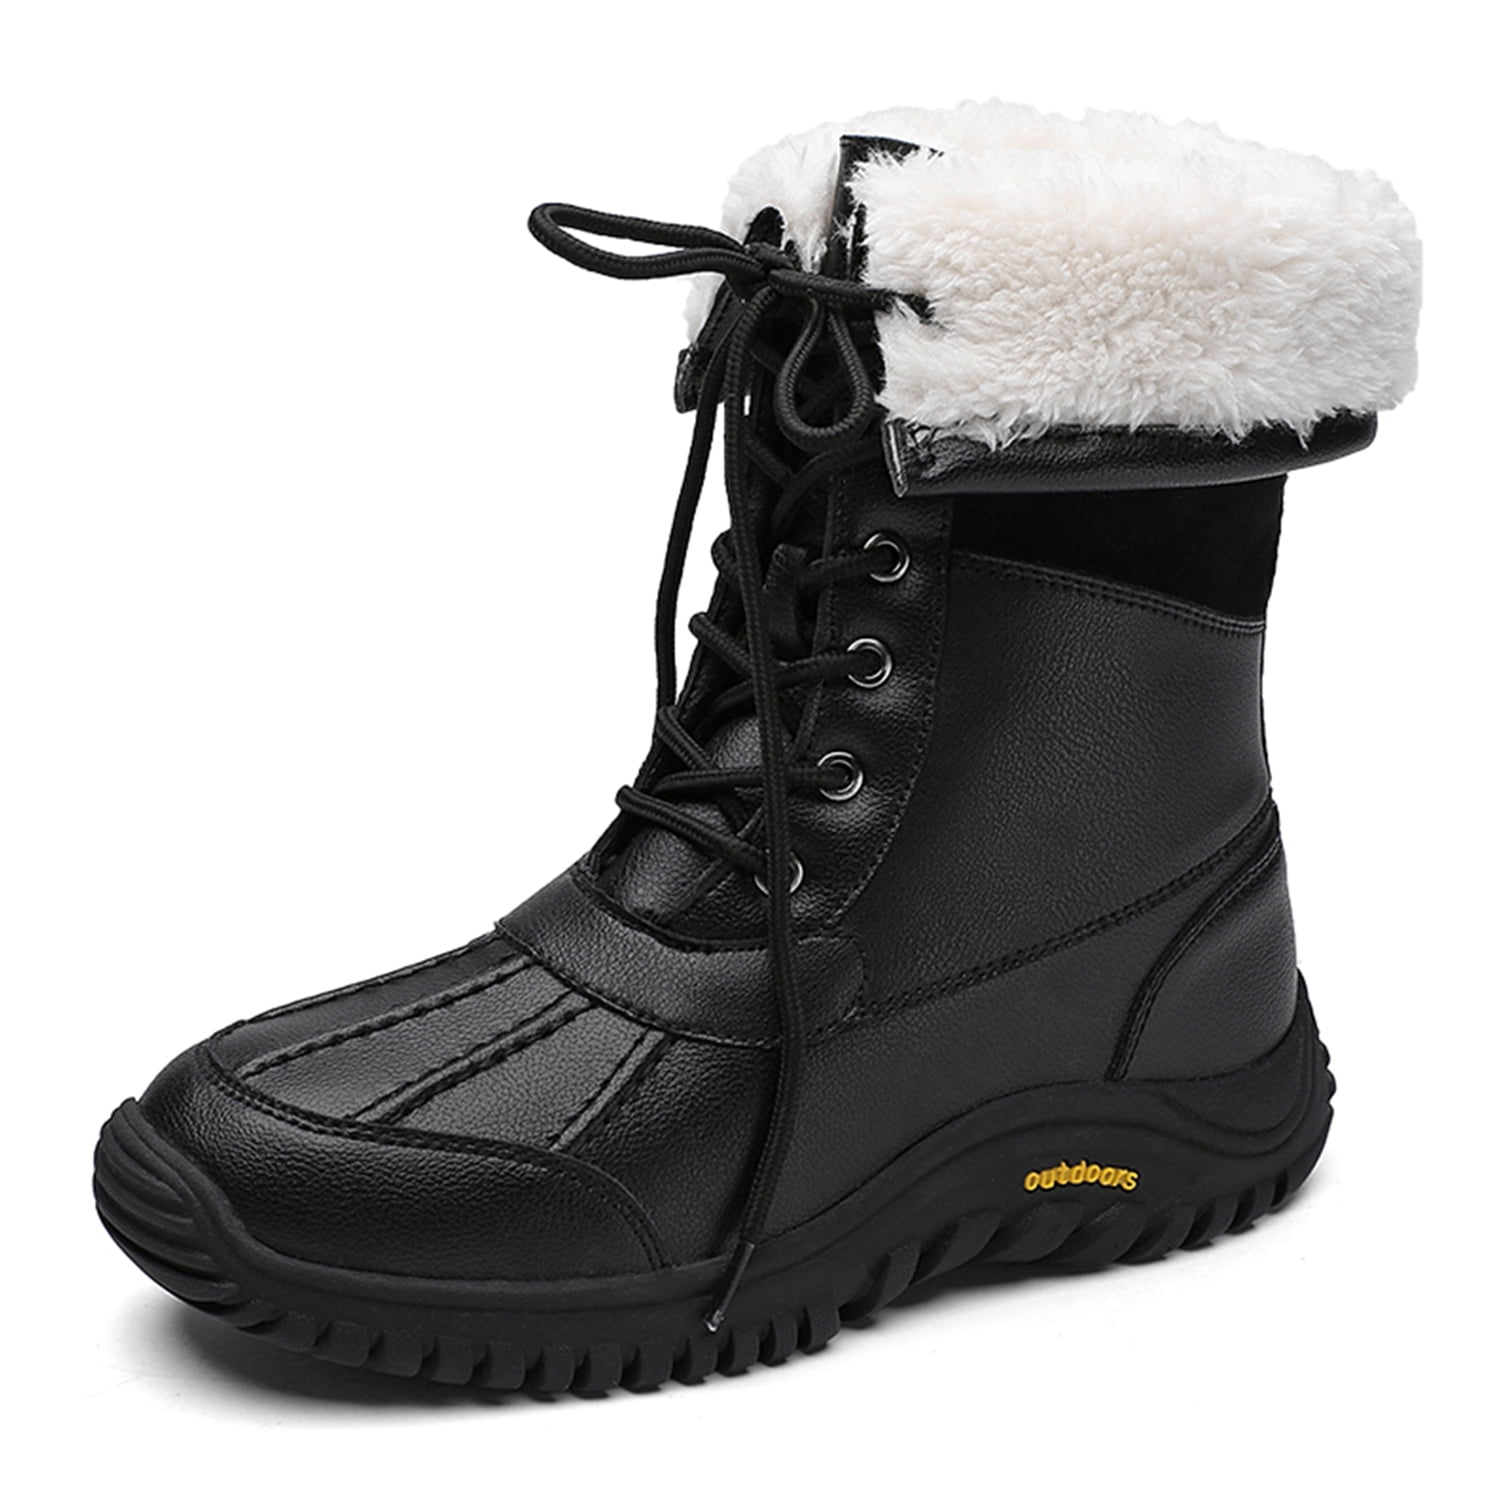 Winter Snow Boots for Women Water Resistant Full Warm Boots Outdoor Mid ...